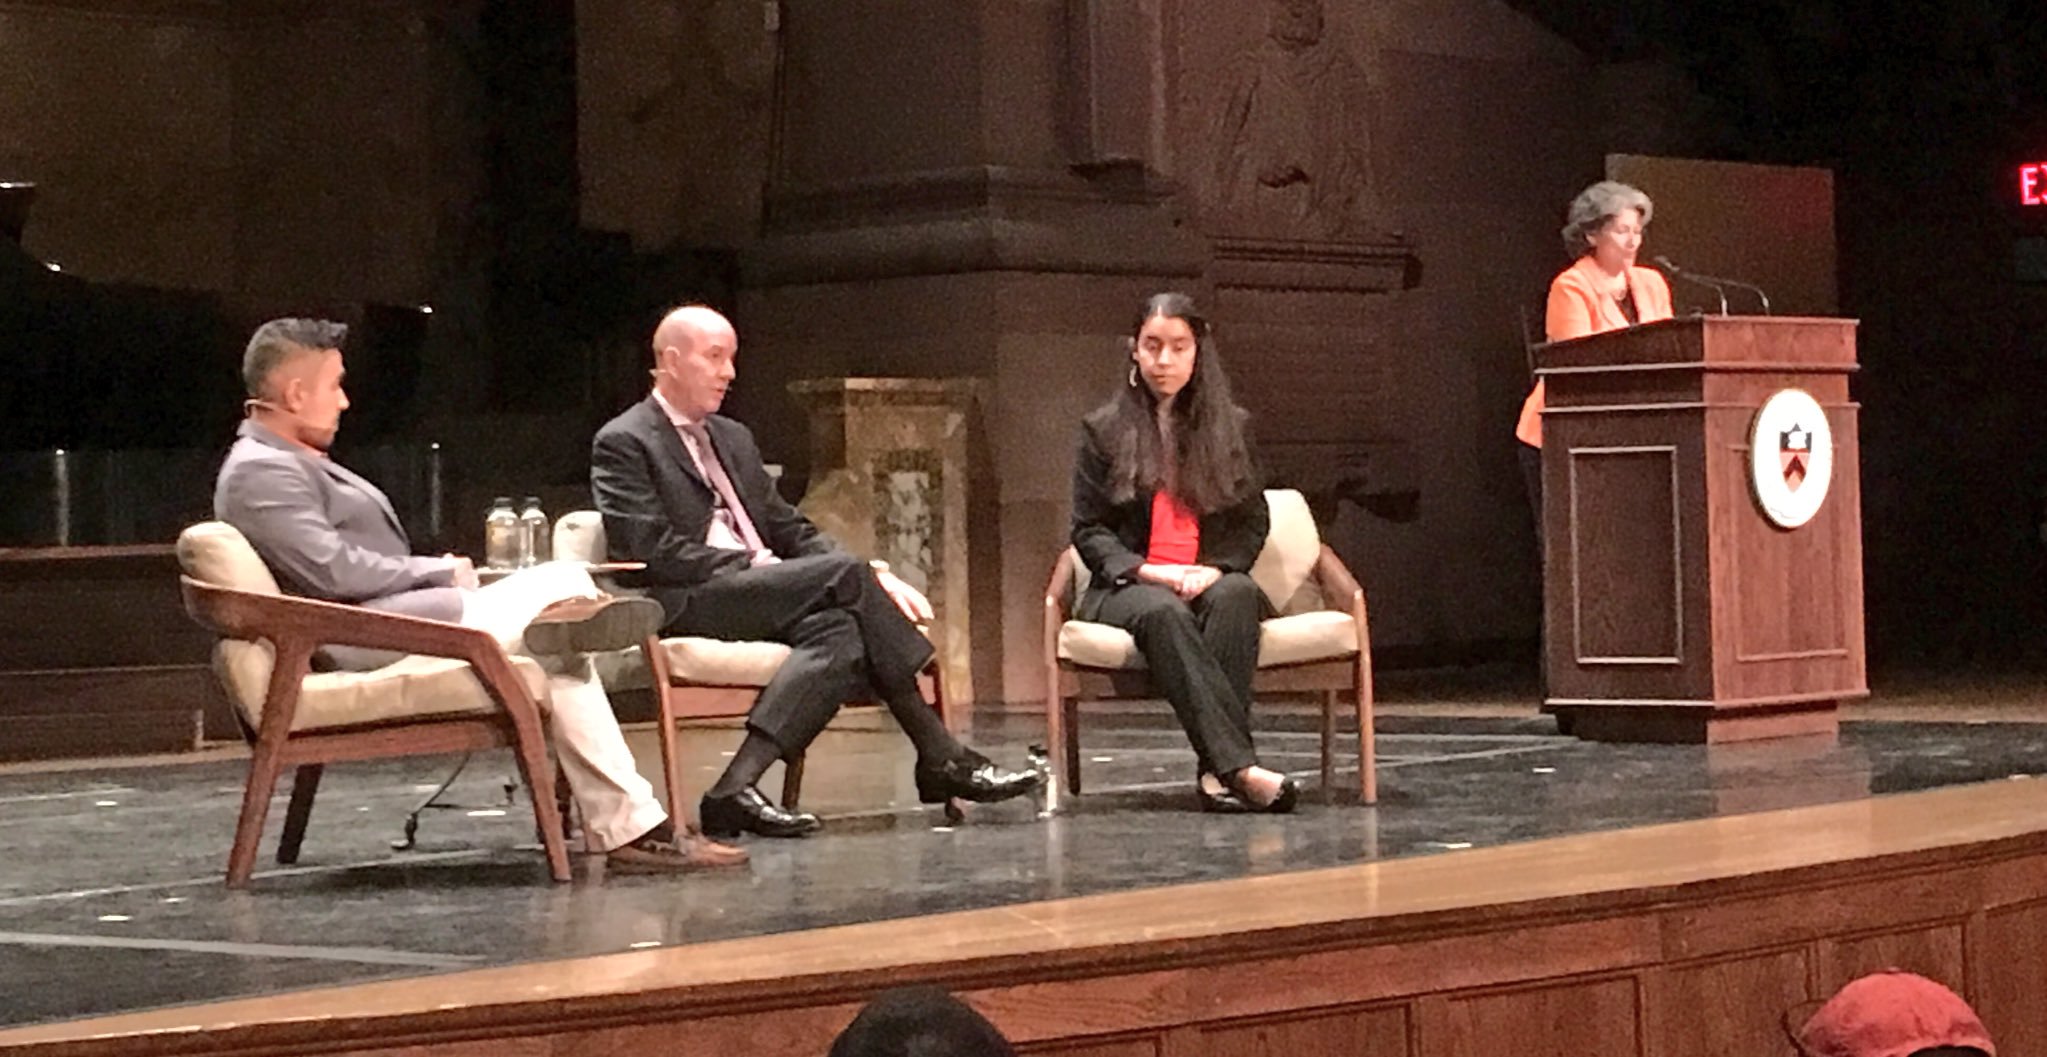 About to hear American hero @AnthonyACLU @ACLU in a conversation with two very impressive @Princeton students at #adelanteprinceton https://t.co/0kWFVfIzTA